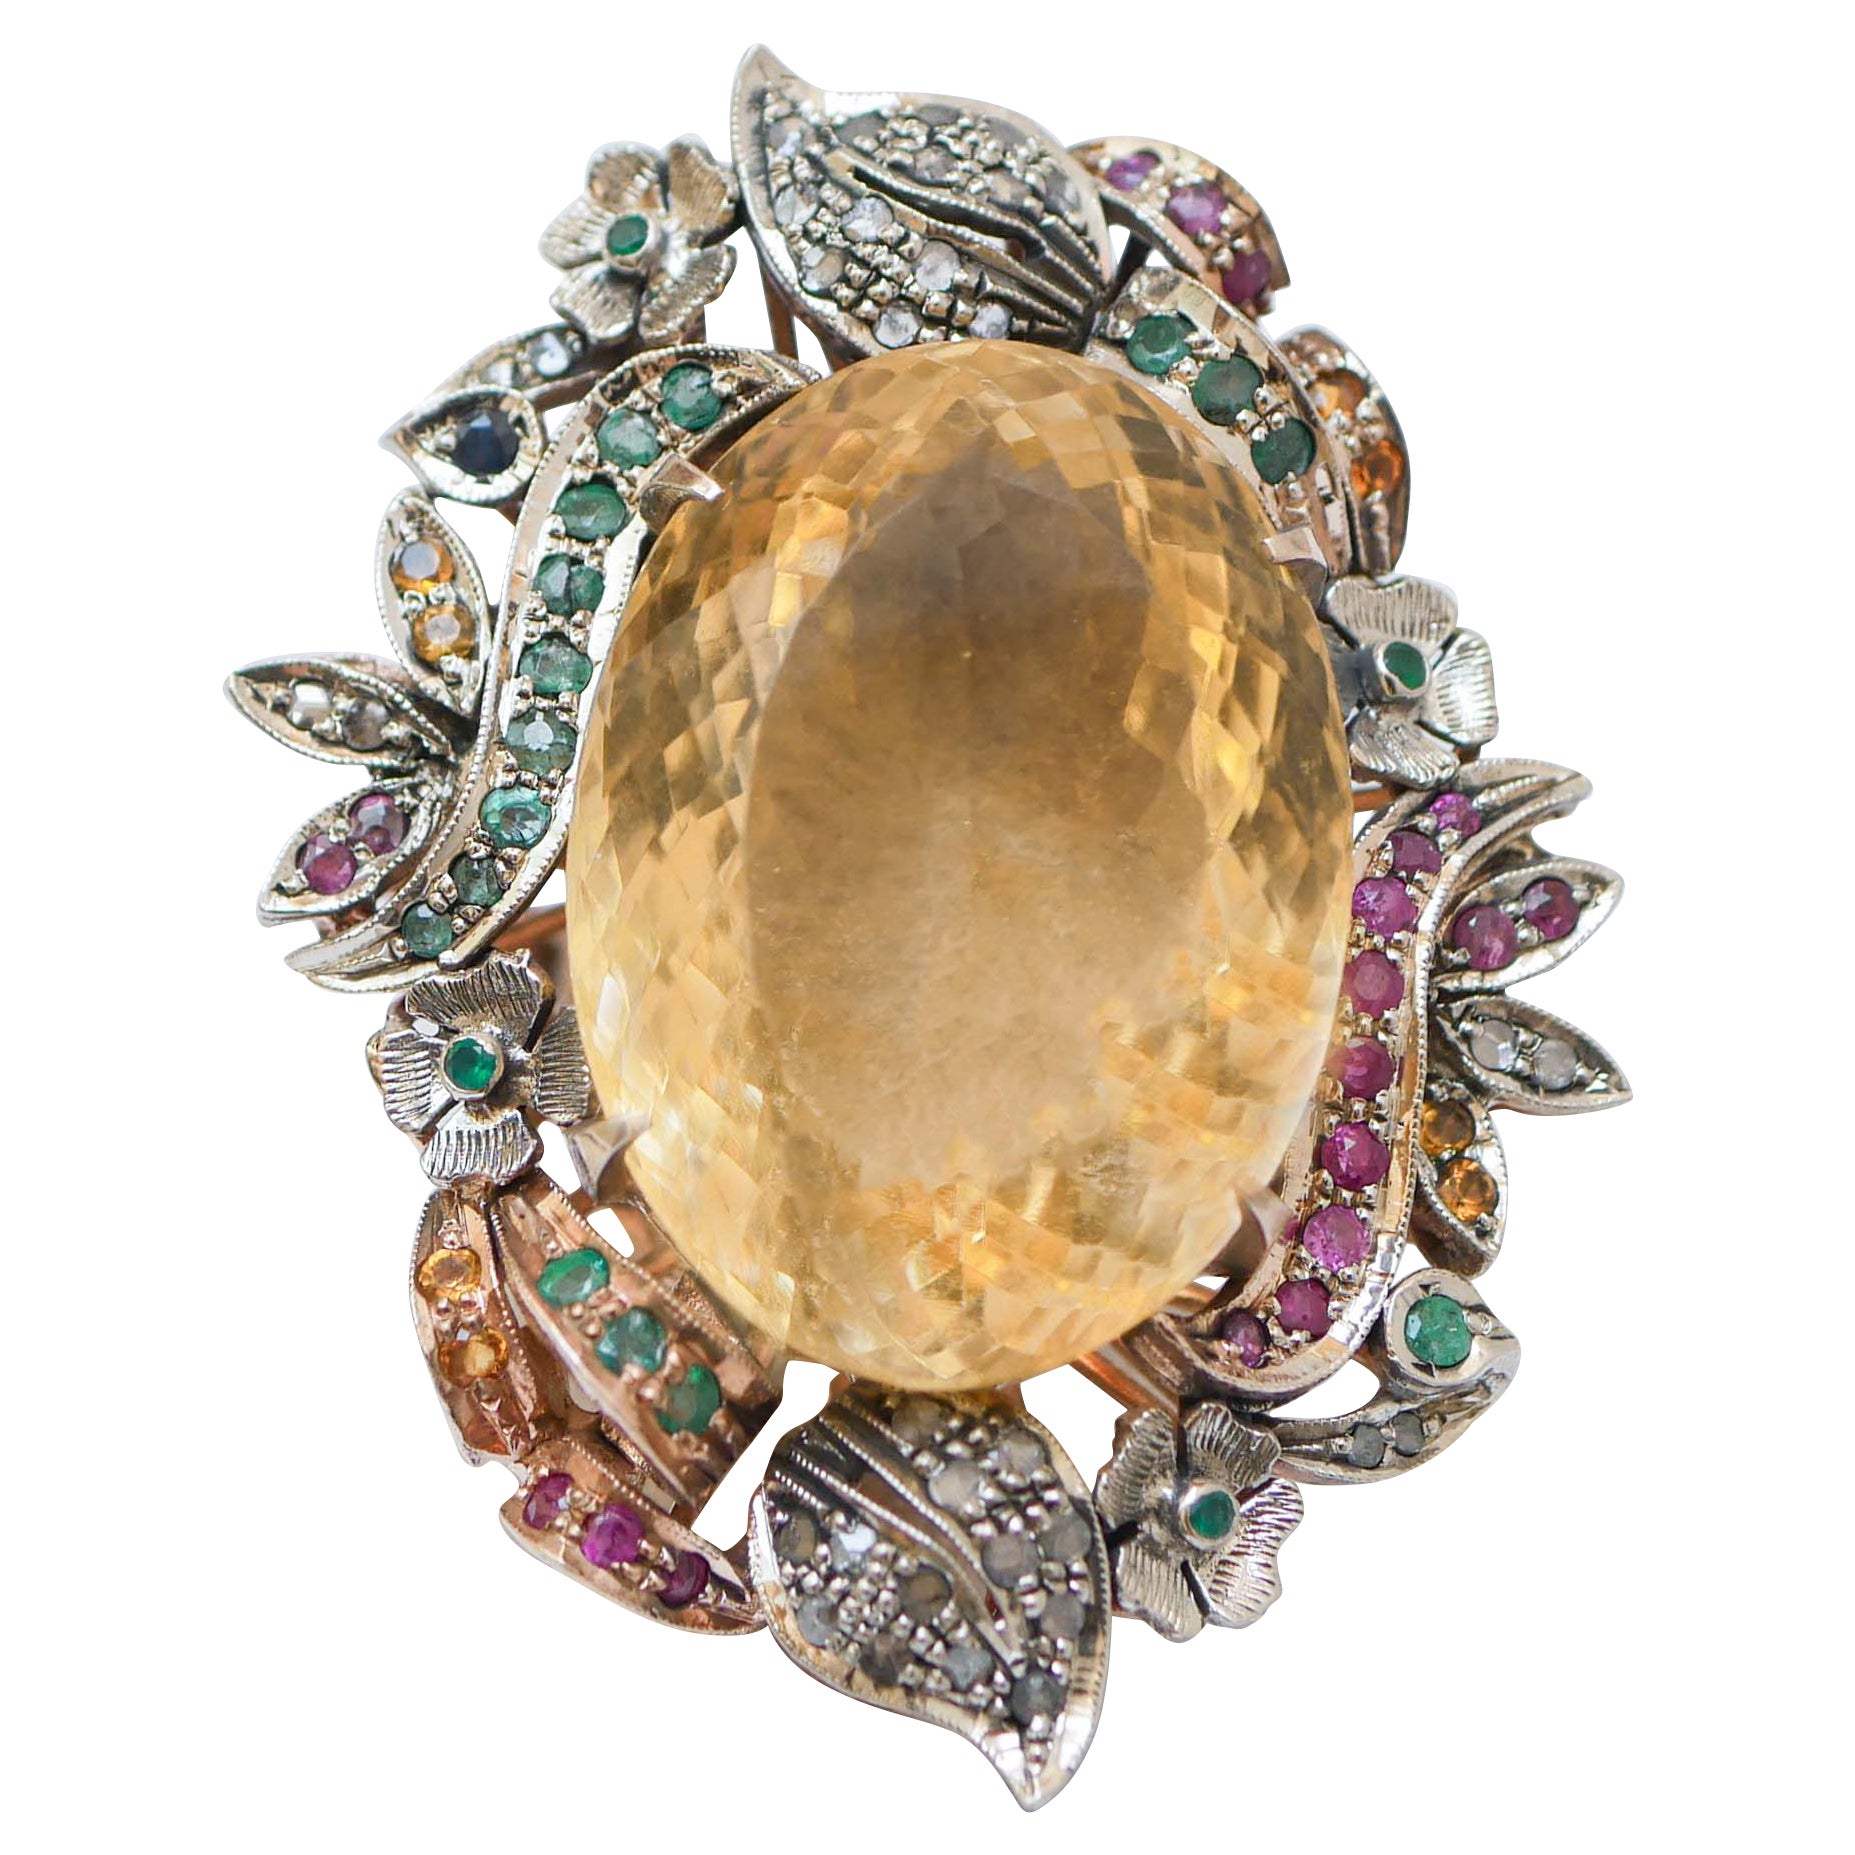 Topaz, Rubies, Emeralds, Sapphires, Diamonds, Rose Gold and Silver Ring.